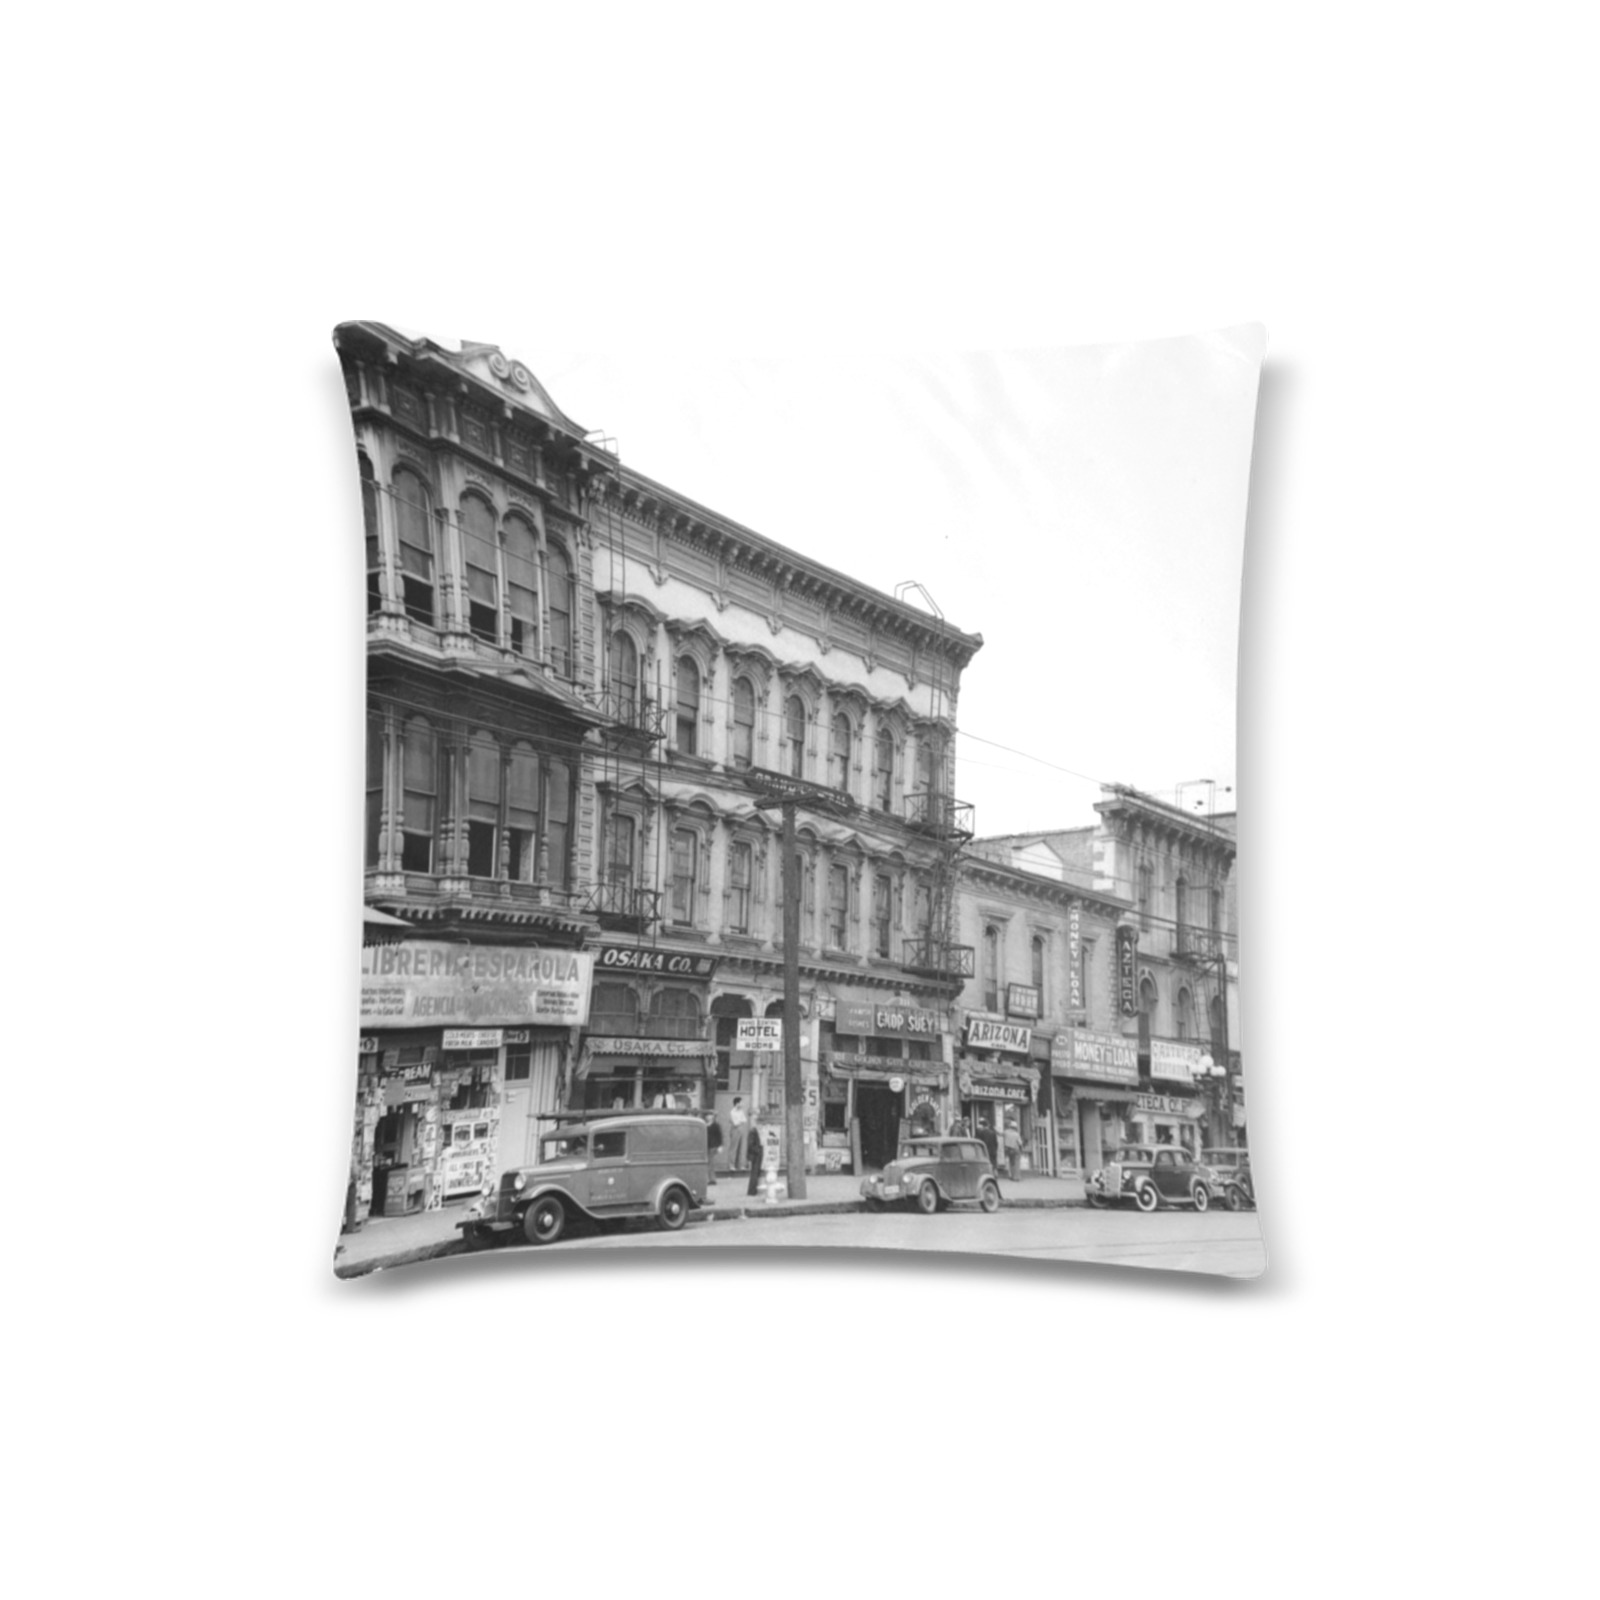 East side of Main Street Los Angeles. 1930s Custom Zippered Pillow Case 18"x18"(Twin Sides)